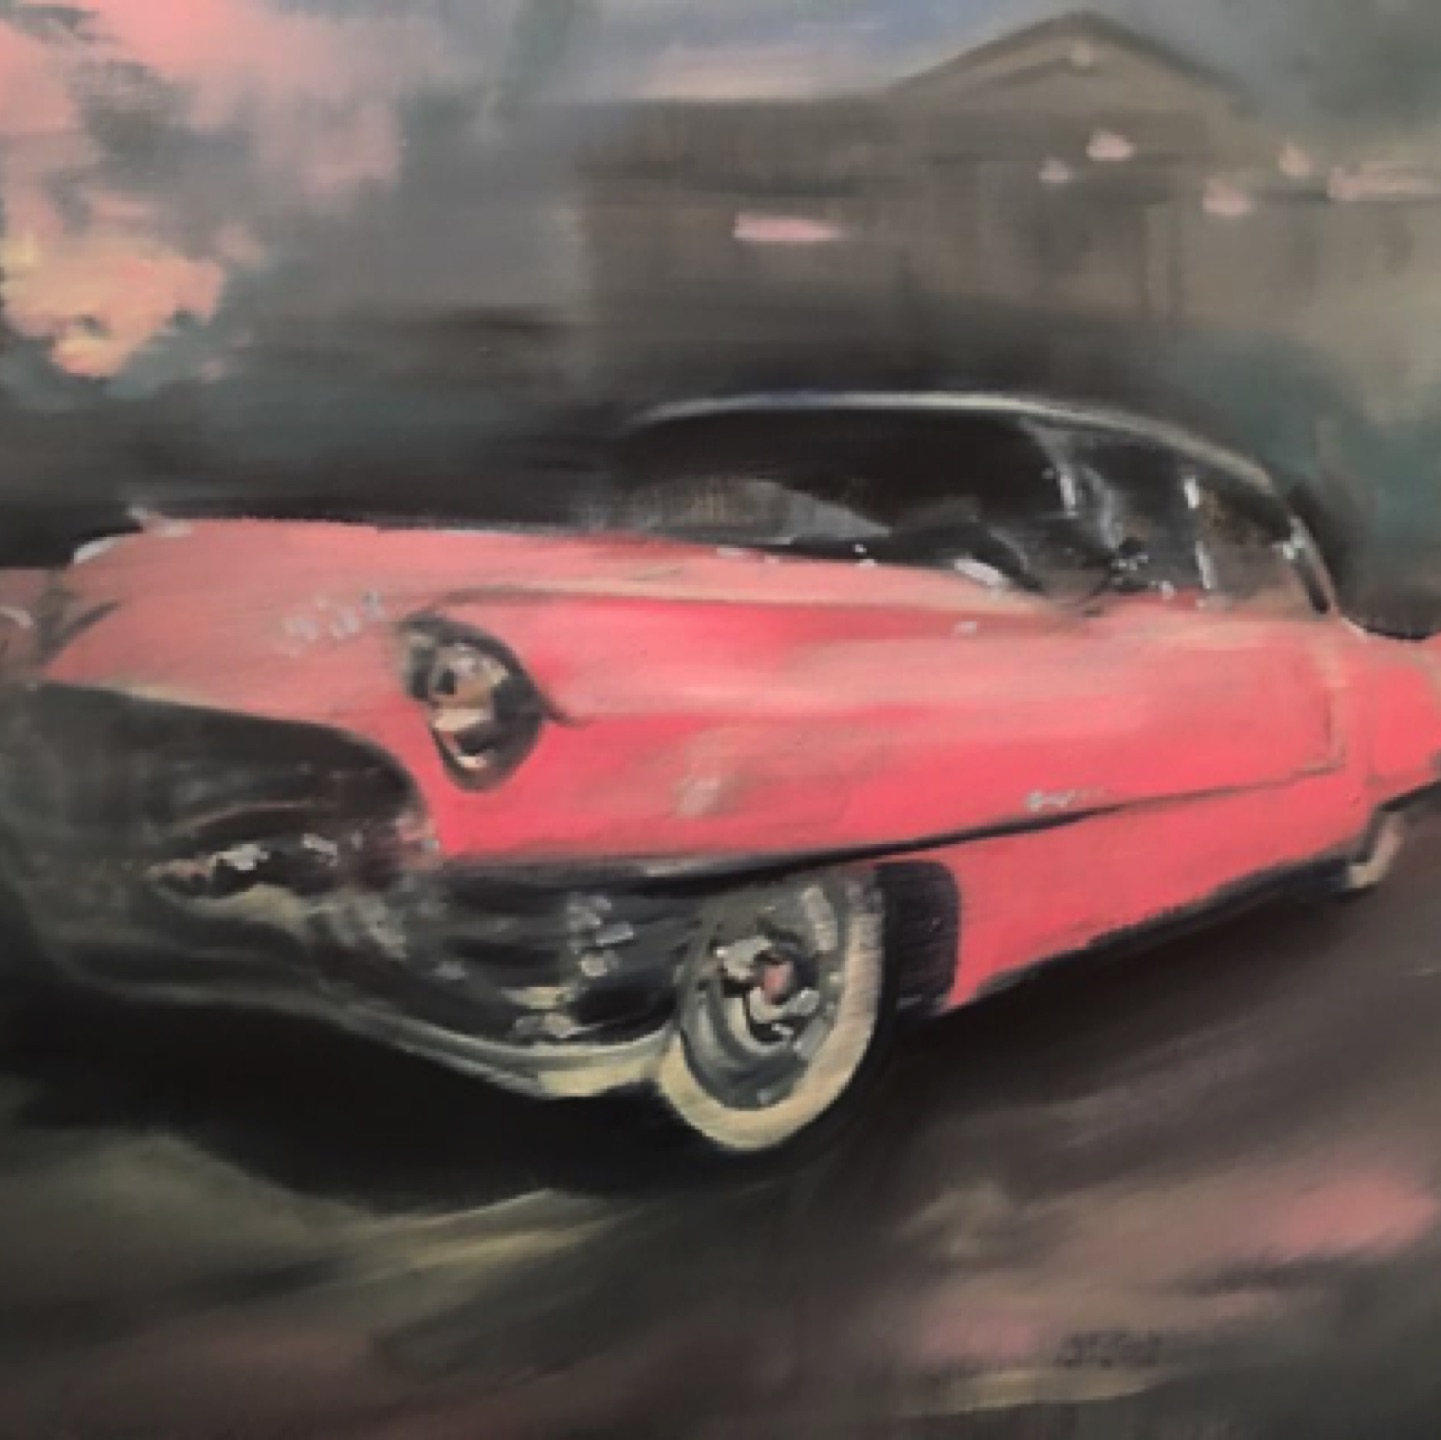 Gregg Chadwick
Pink Cadillac - Elvis at Graceland
24"x30"oil on linen 2017
Dewitt Collection, Vavacaville
Sold May 2020